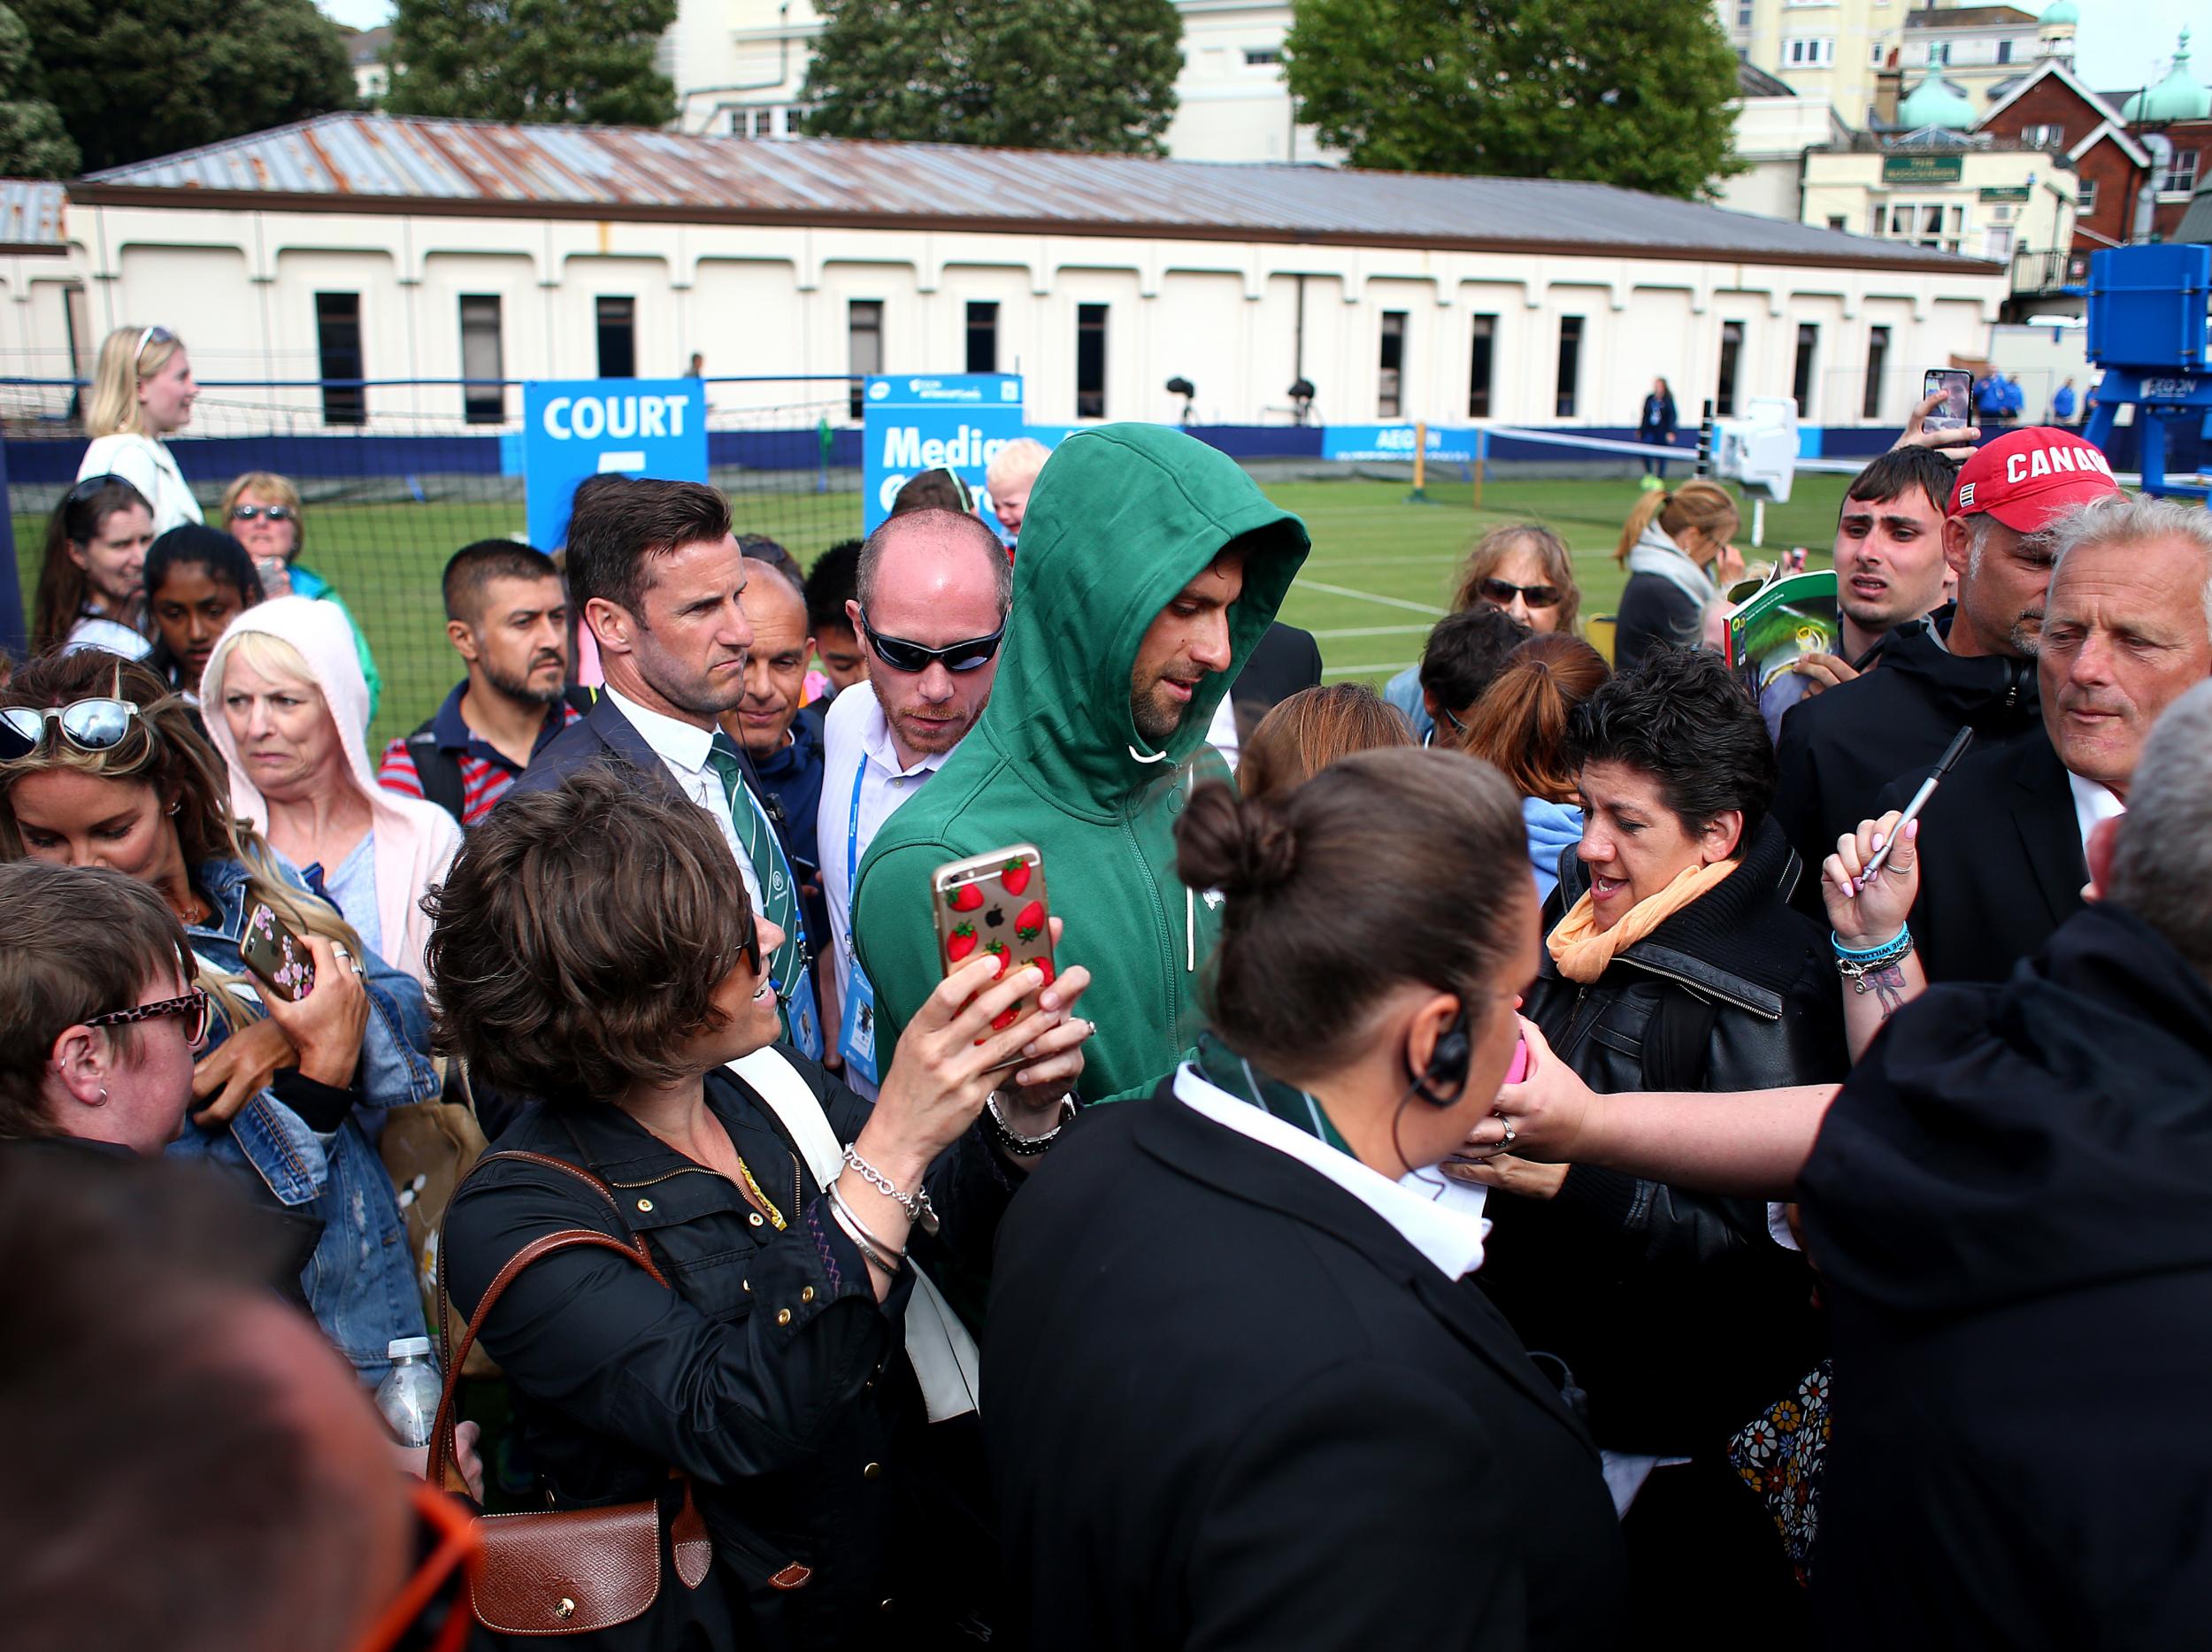 Djokovic is the star attraction in Eastbourne this week